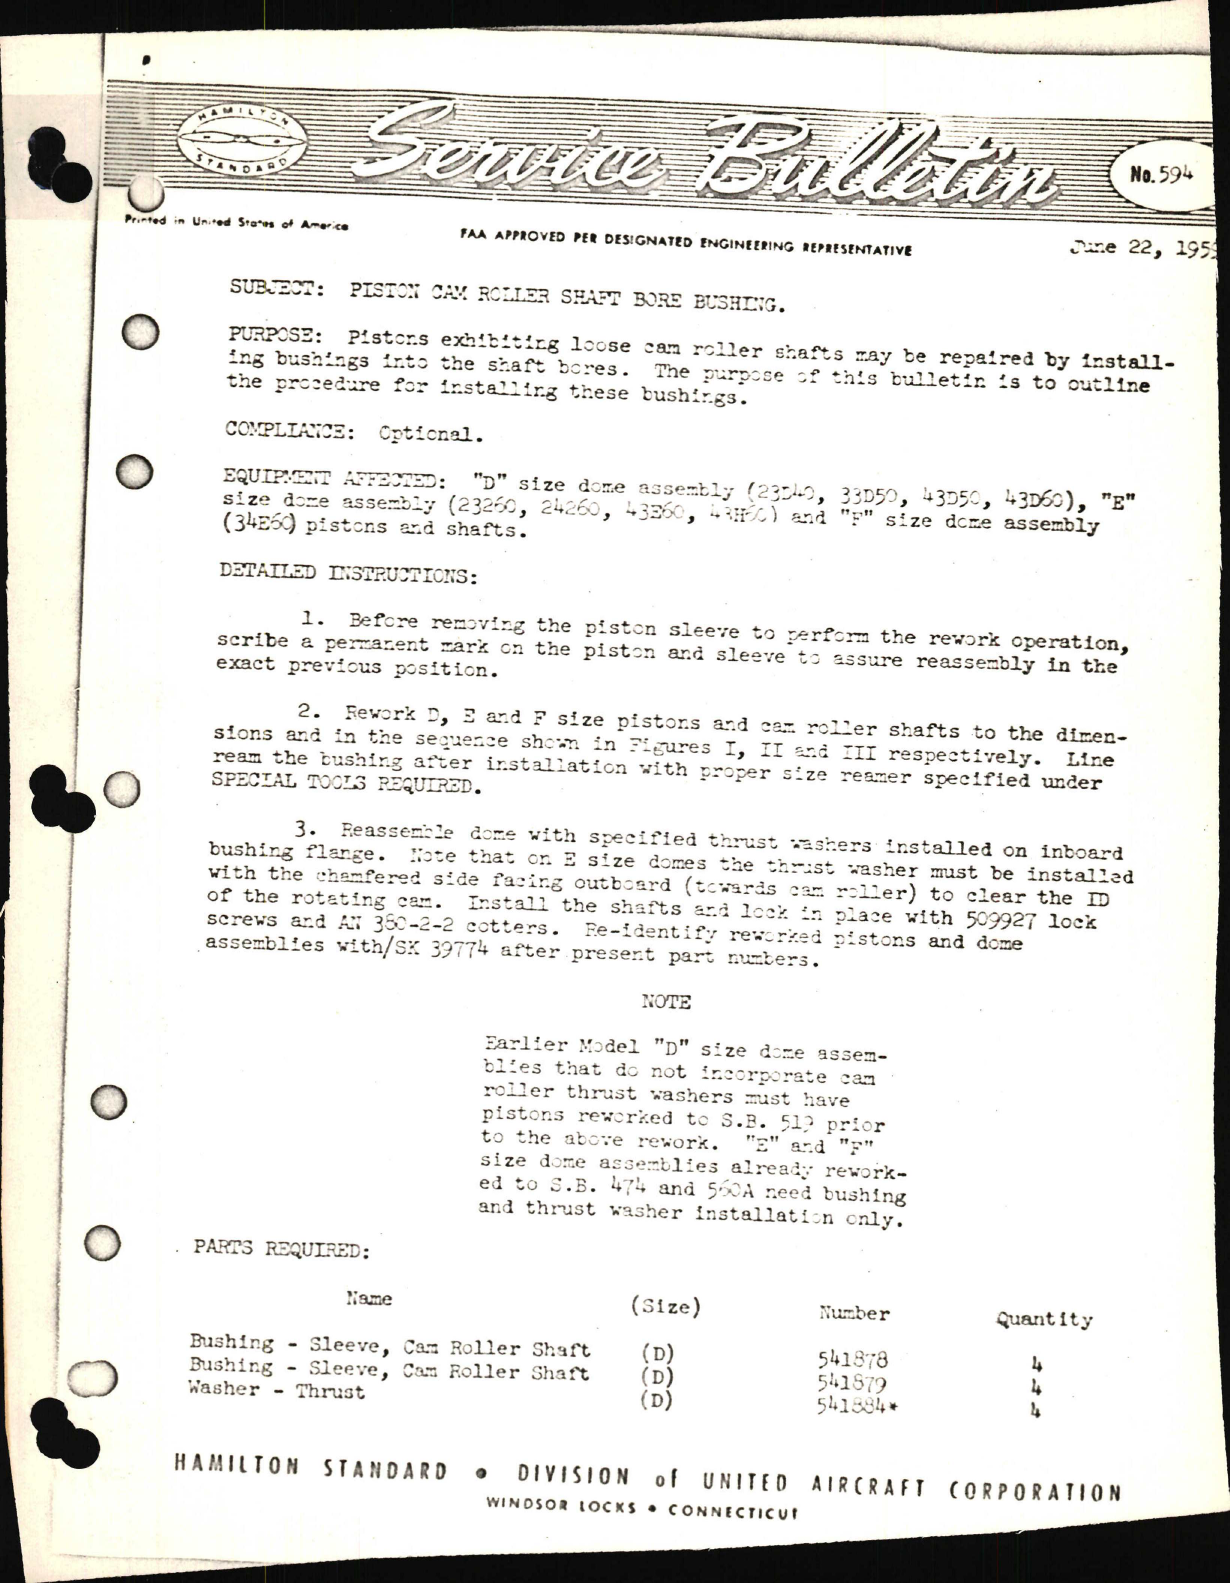 Sample page 1 from AirCorps Library document: Piston Cam Roller Shaft Bore Bushing